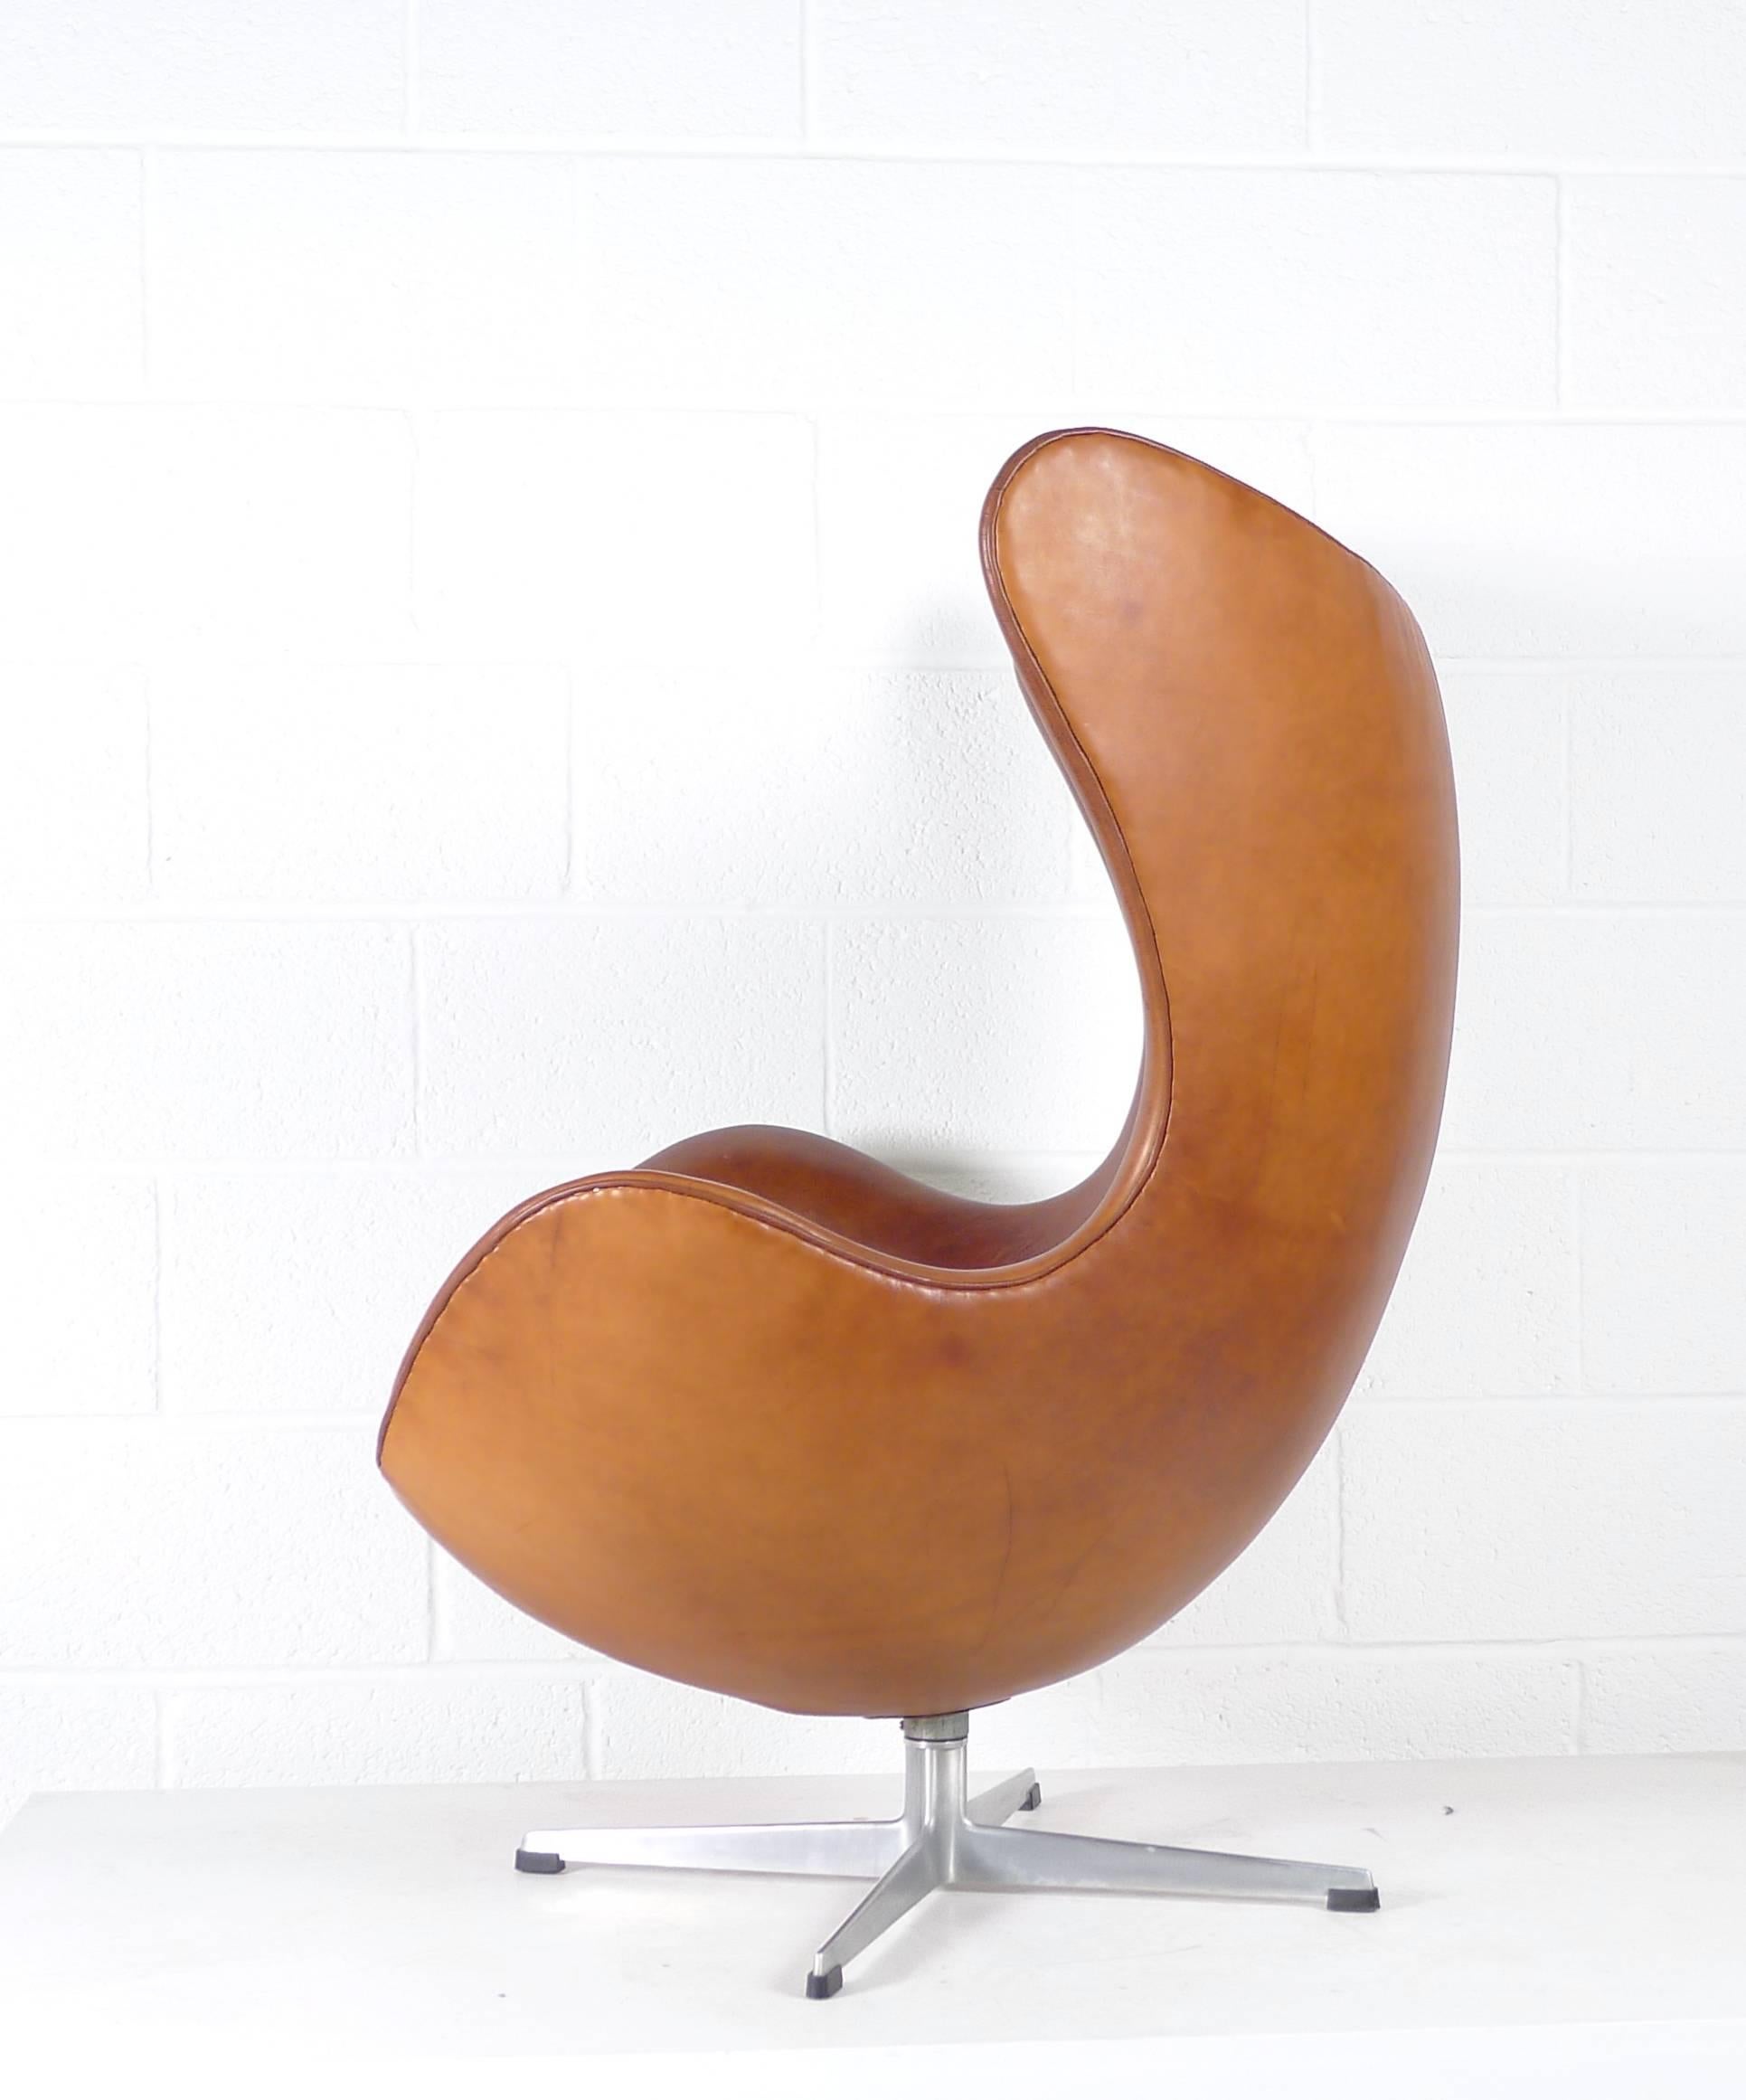 Absolutely stunning Arne Jacobsen Egg chair, designed for Fritz Hansen, Denmark, upholstered in a Classic Scottish leather as used for the interior of Morgan sports cars. A very early example with the deeper foot glides. 
Over time the leather will